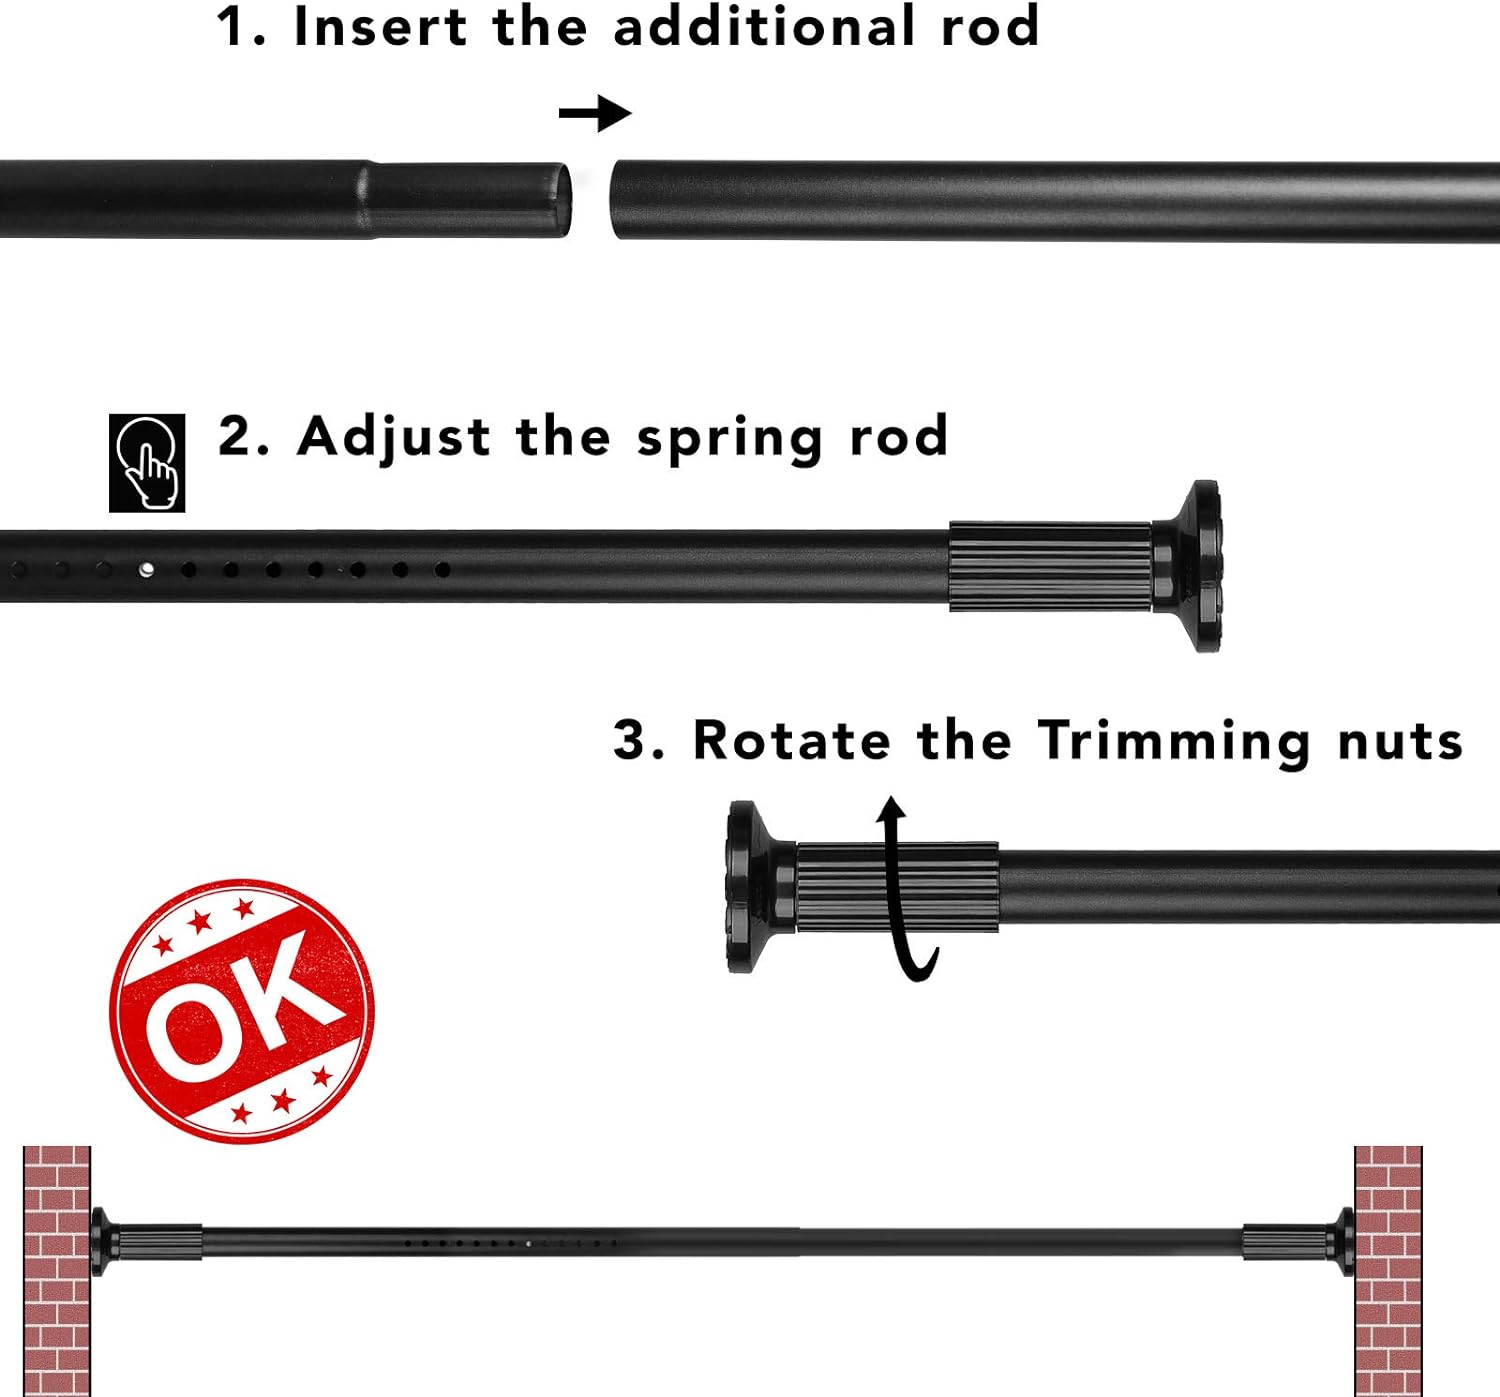 Umimile Tension Curtain Rod 51 86, How To Adjust Spring Tension Curtain Rods